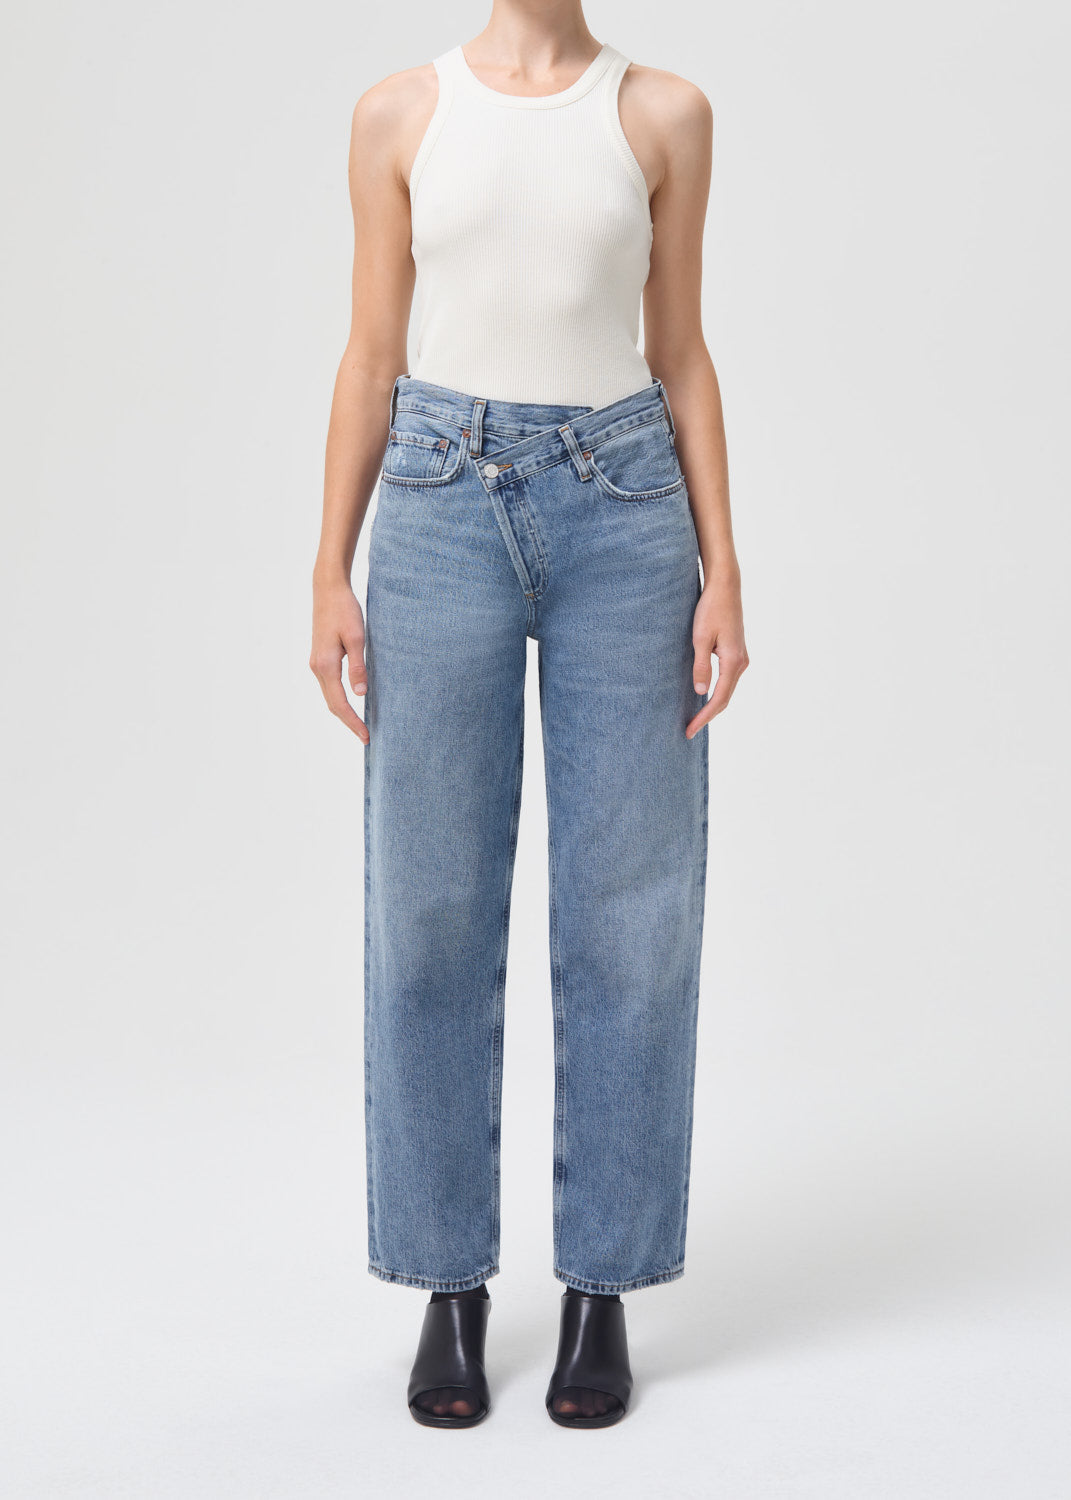 Criss Cross Upsized Jean Collection – AGOLDE